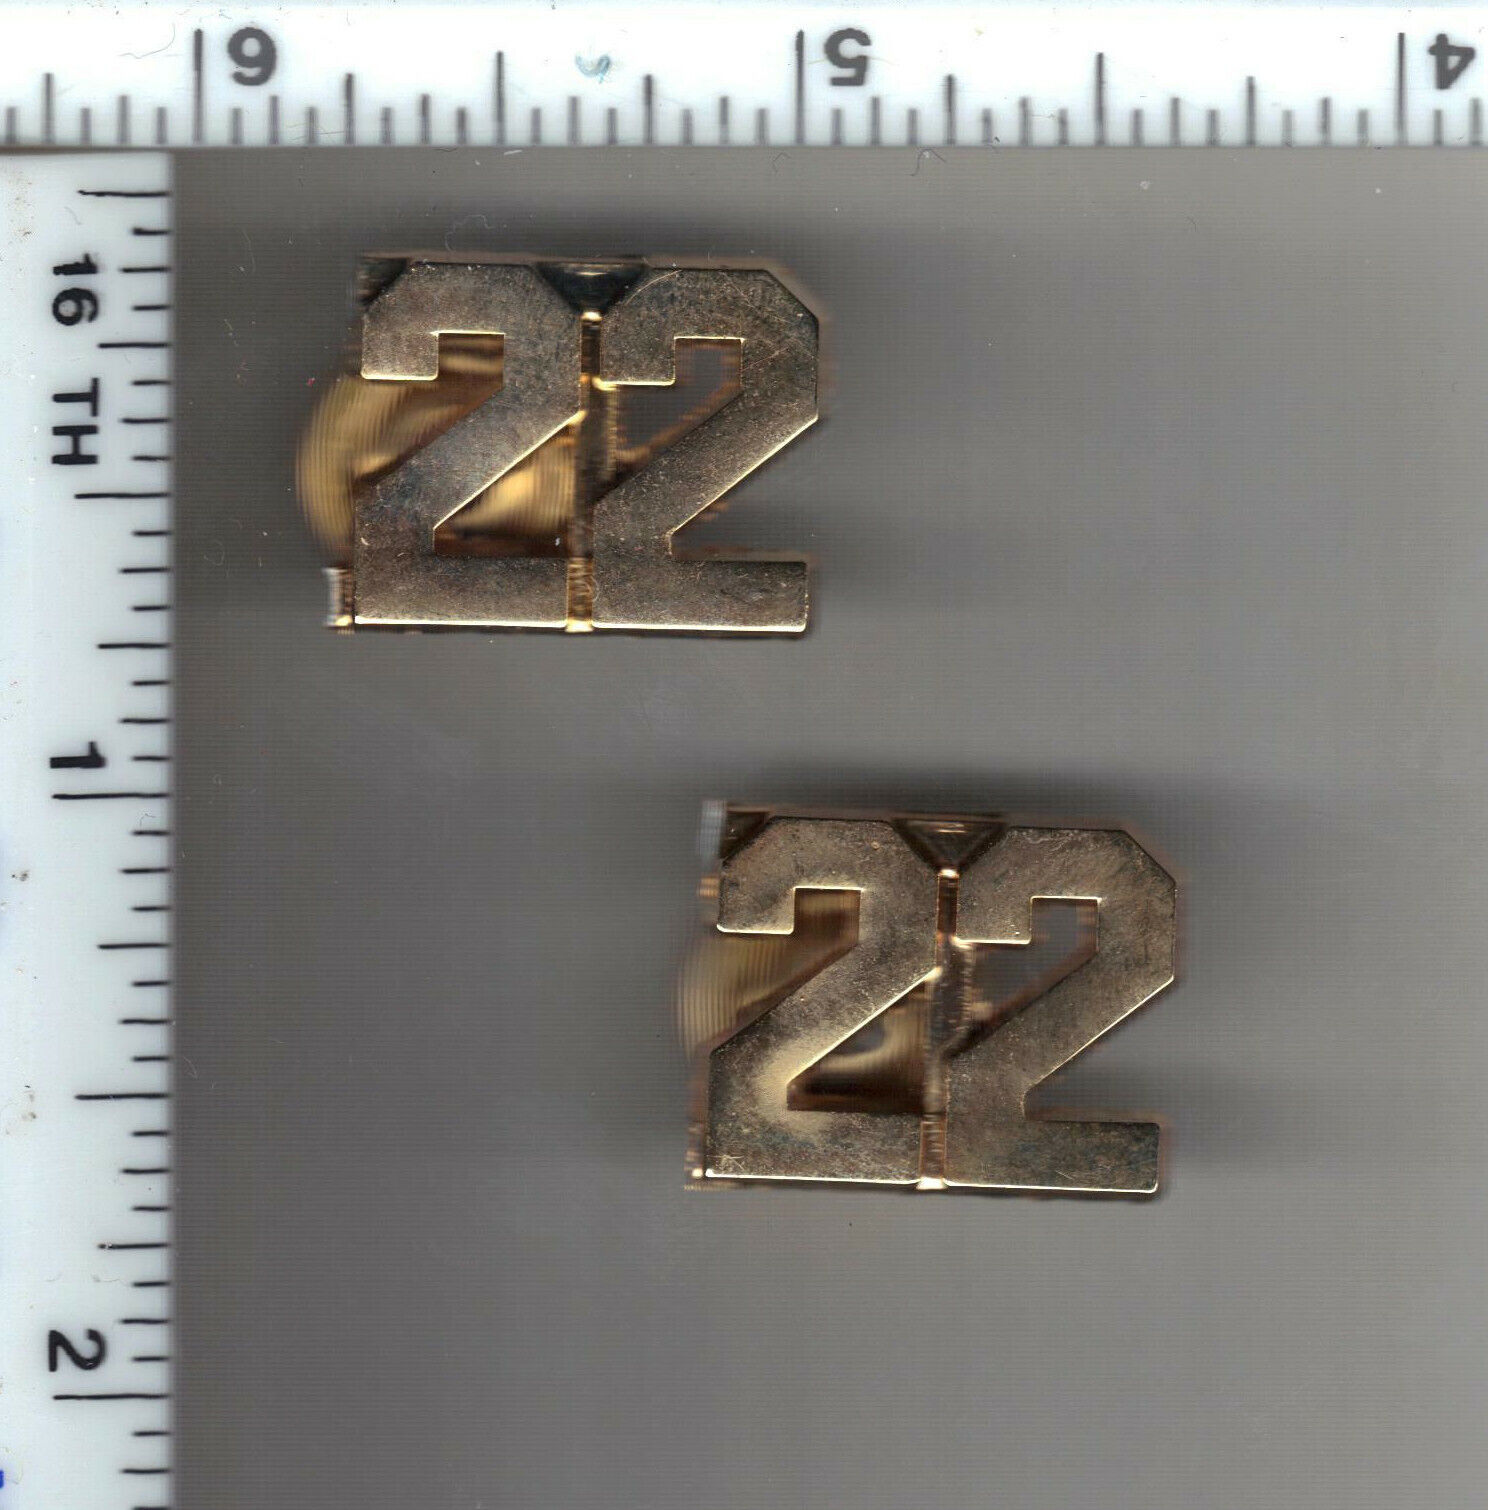 NYC 2-2 Television Show - NYC Fictitious 22nd Precinct Gold Collar Brass Set